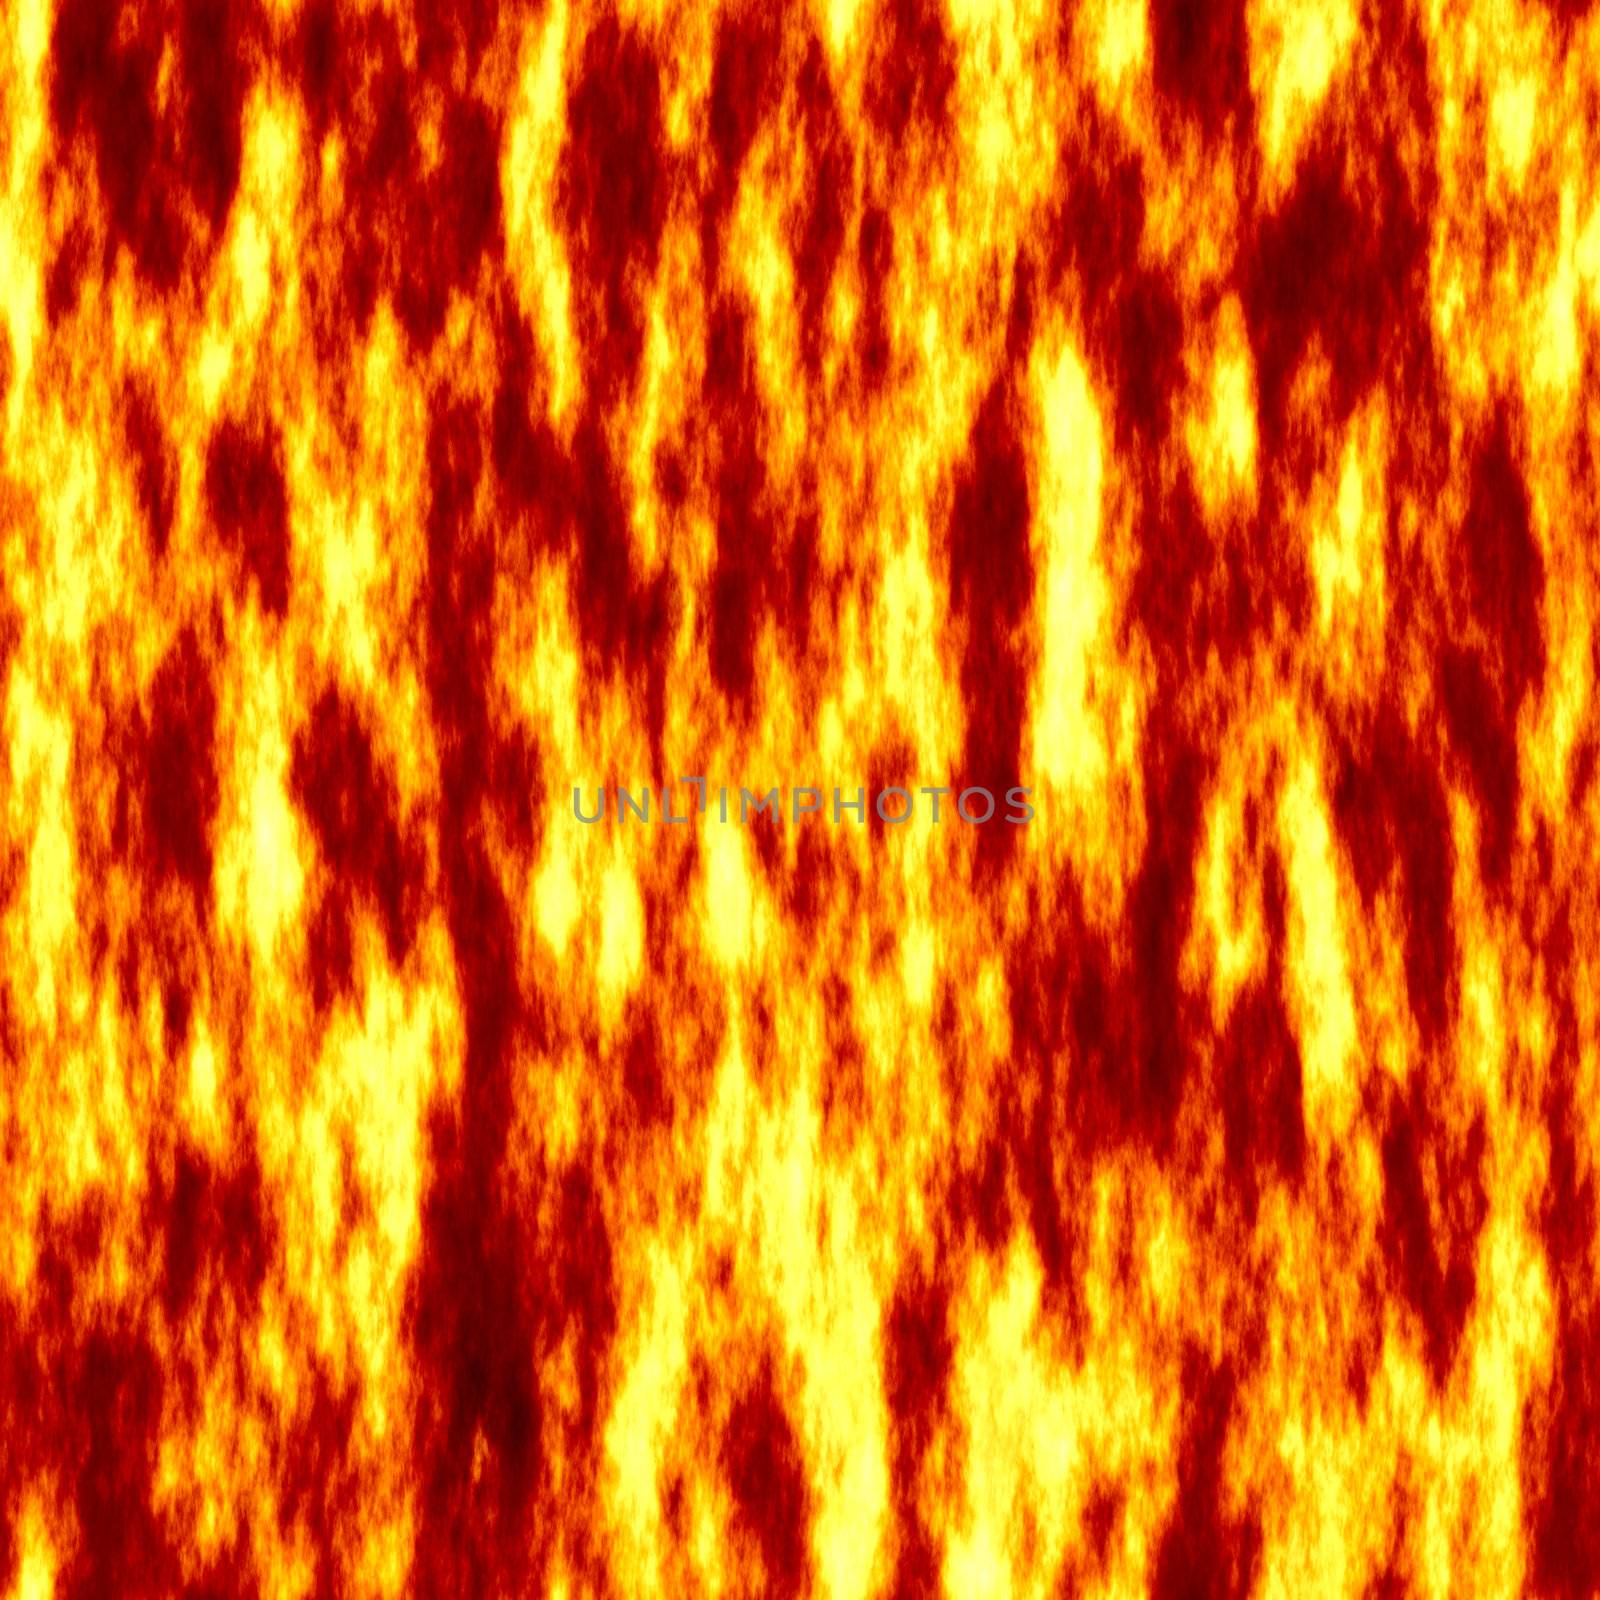 
fire background, will tile seamlessly as a pattern